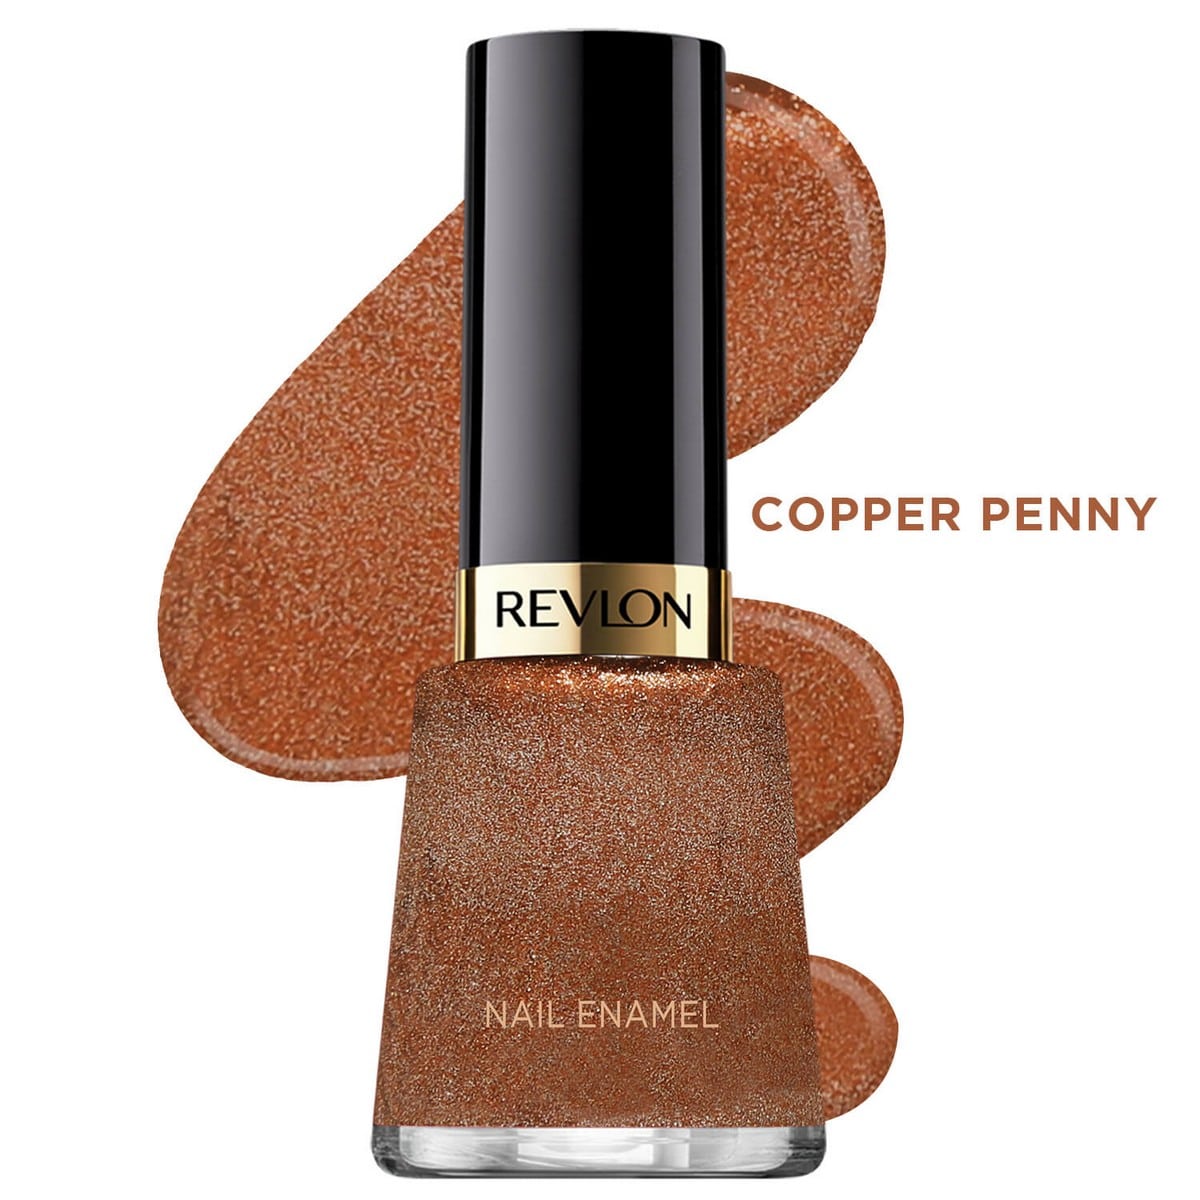 Revlon Nail Polish Only $1 Shipped on Amazon | Great Subscribe & Save Filler